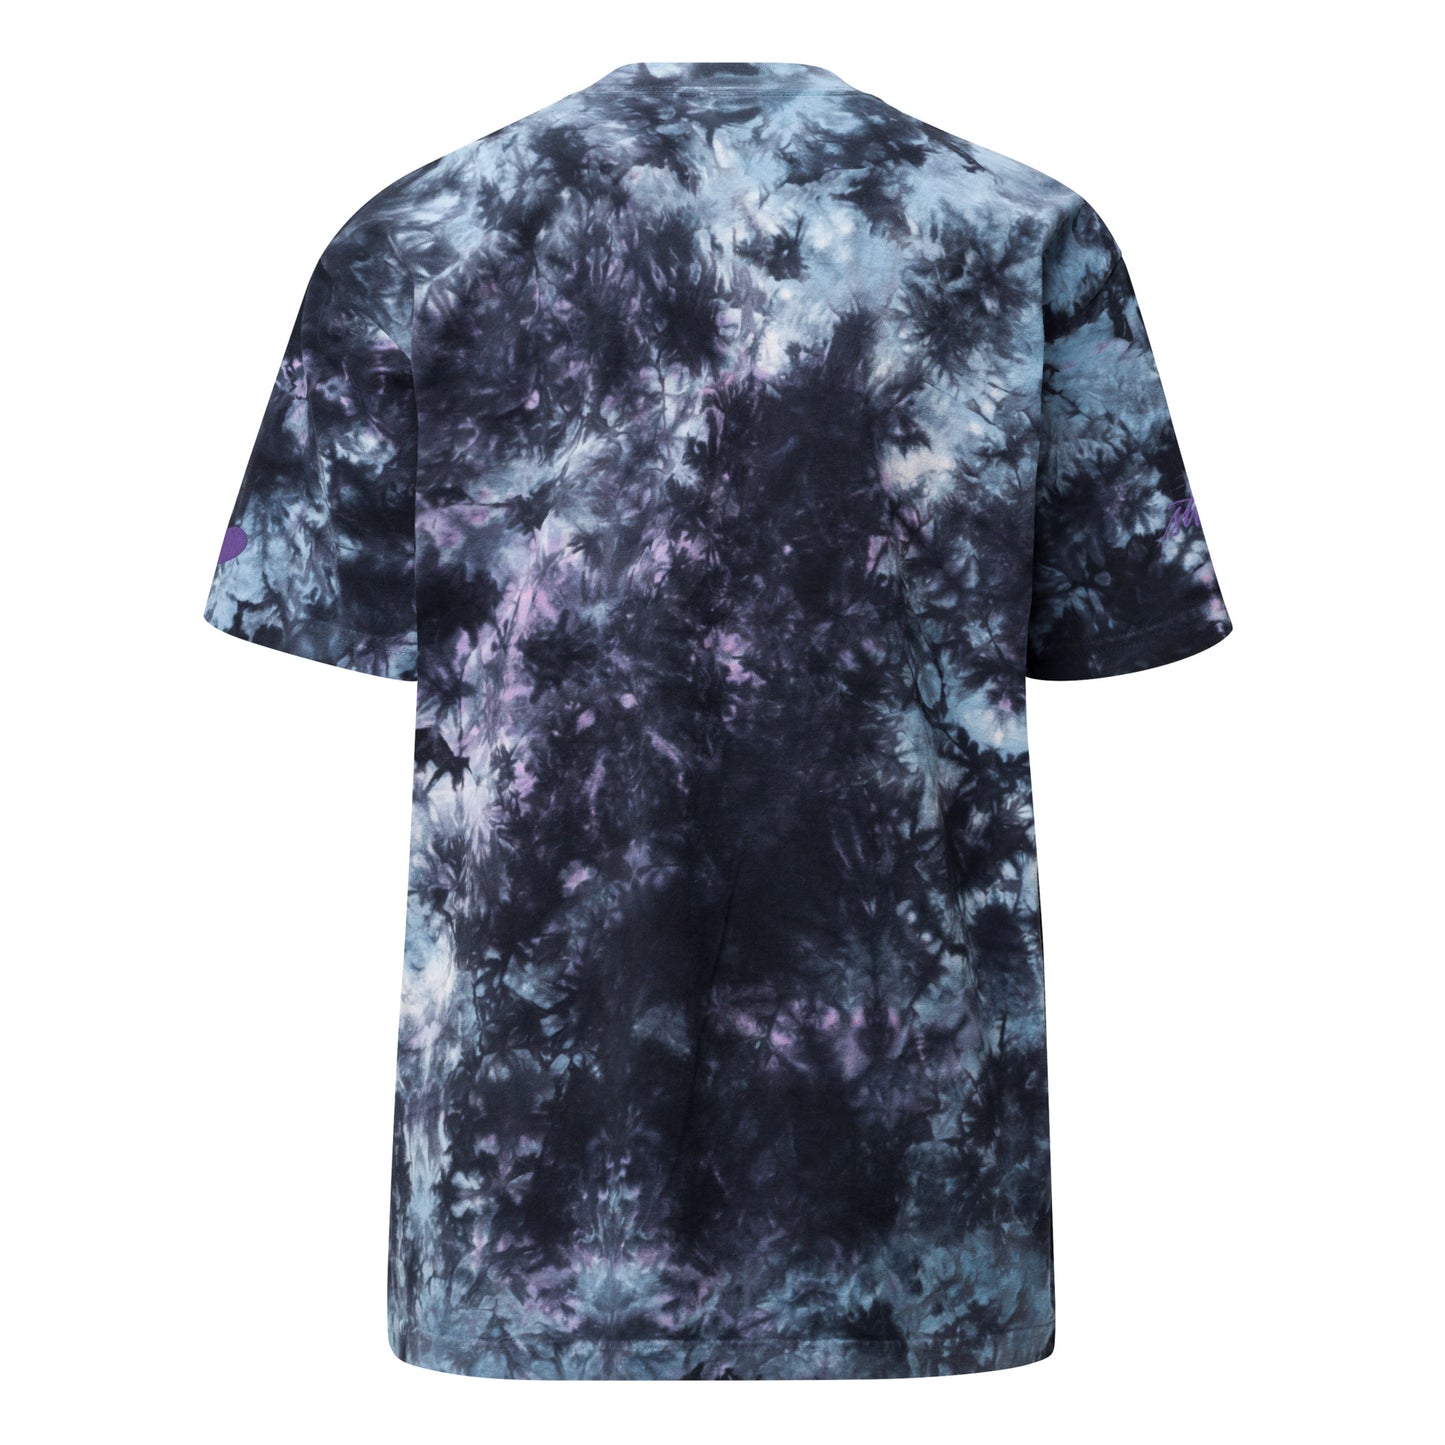 Embroidered Purple "Strong" Calligraphy Oversized Tie-Dye T-Shirt